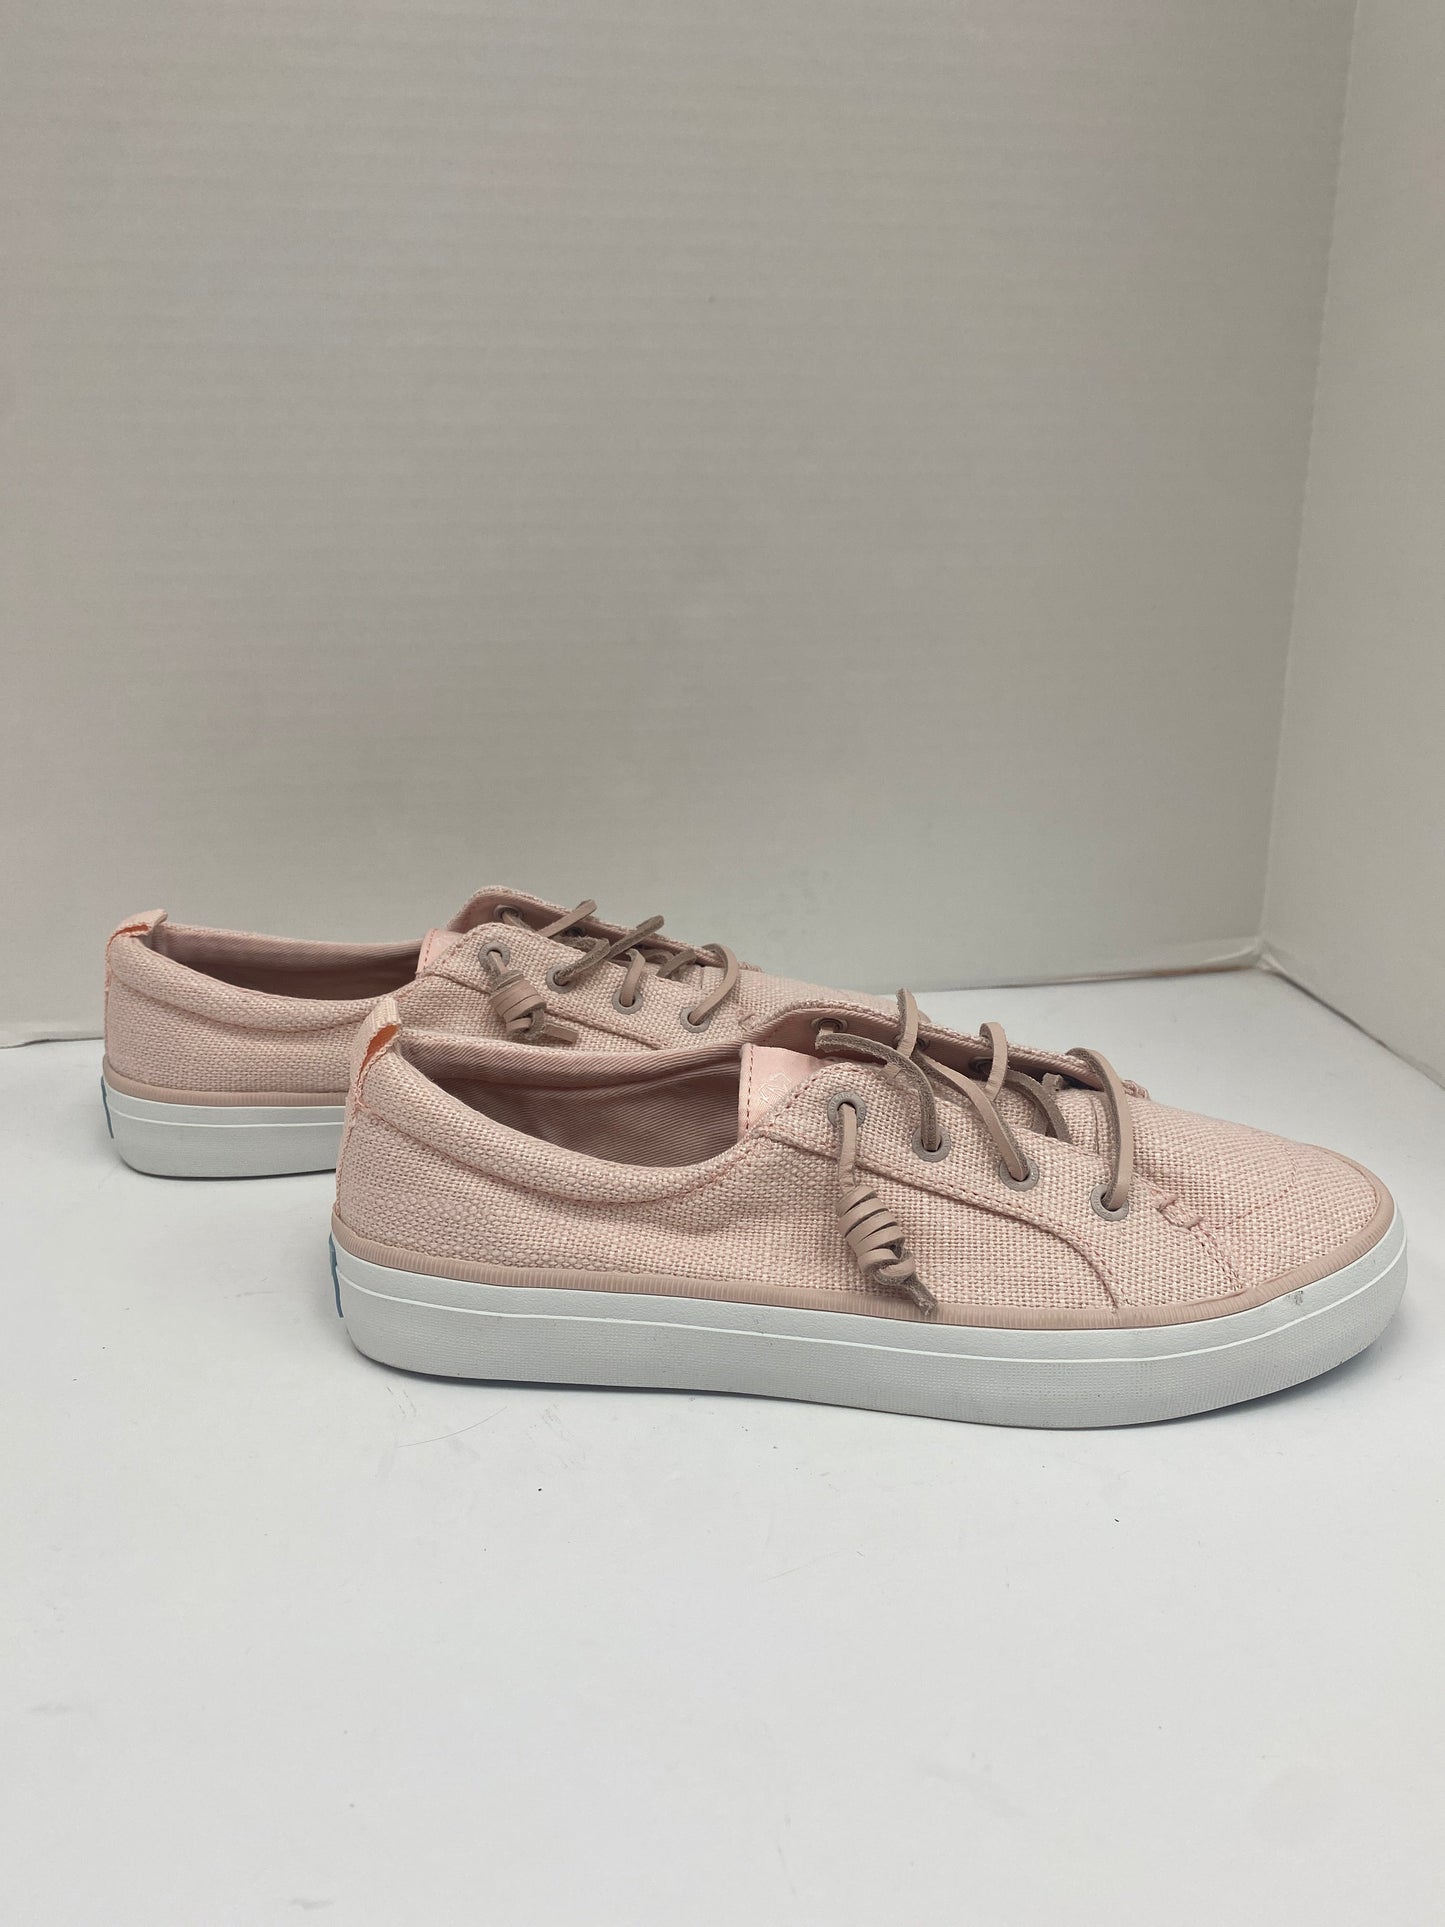 Pink Shoes Sneakers Sperry, Size 8